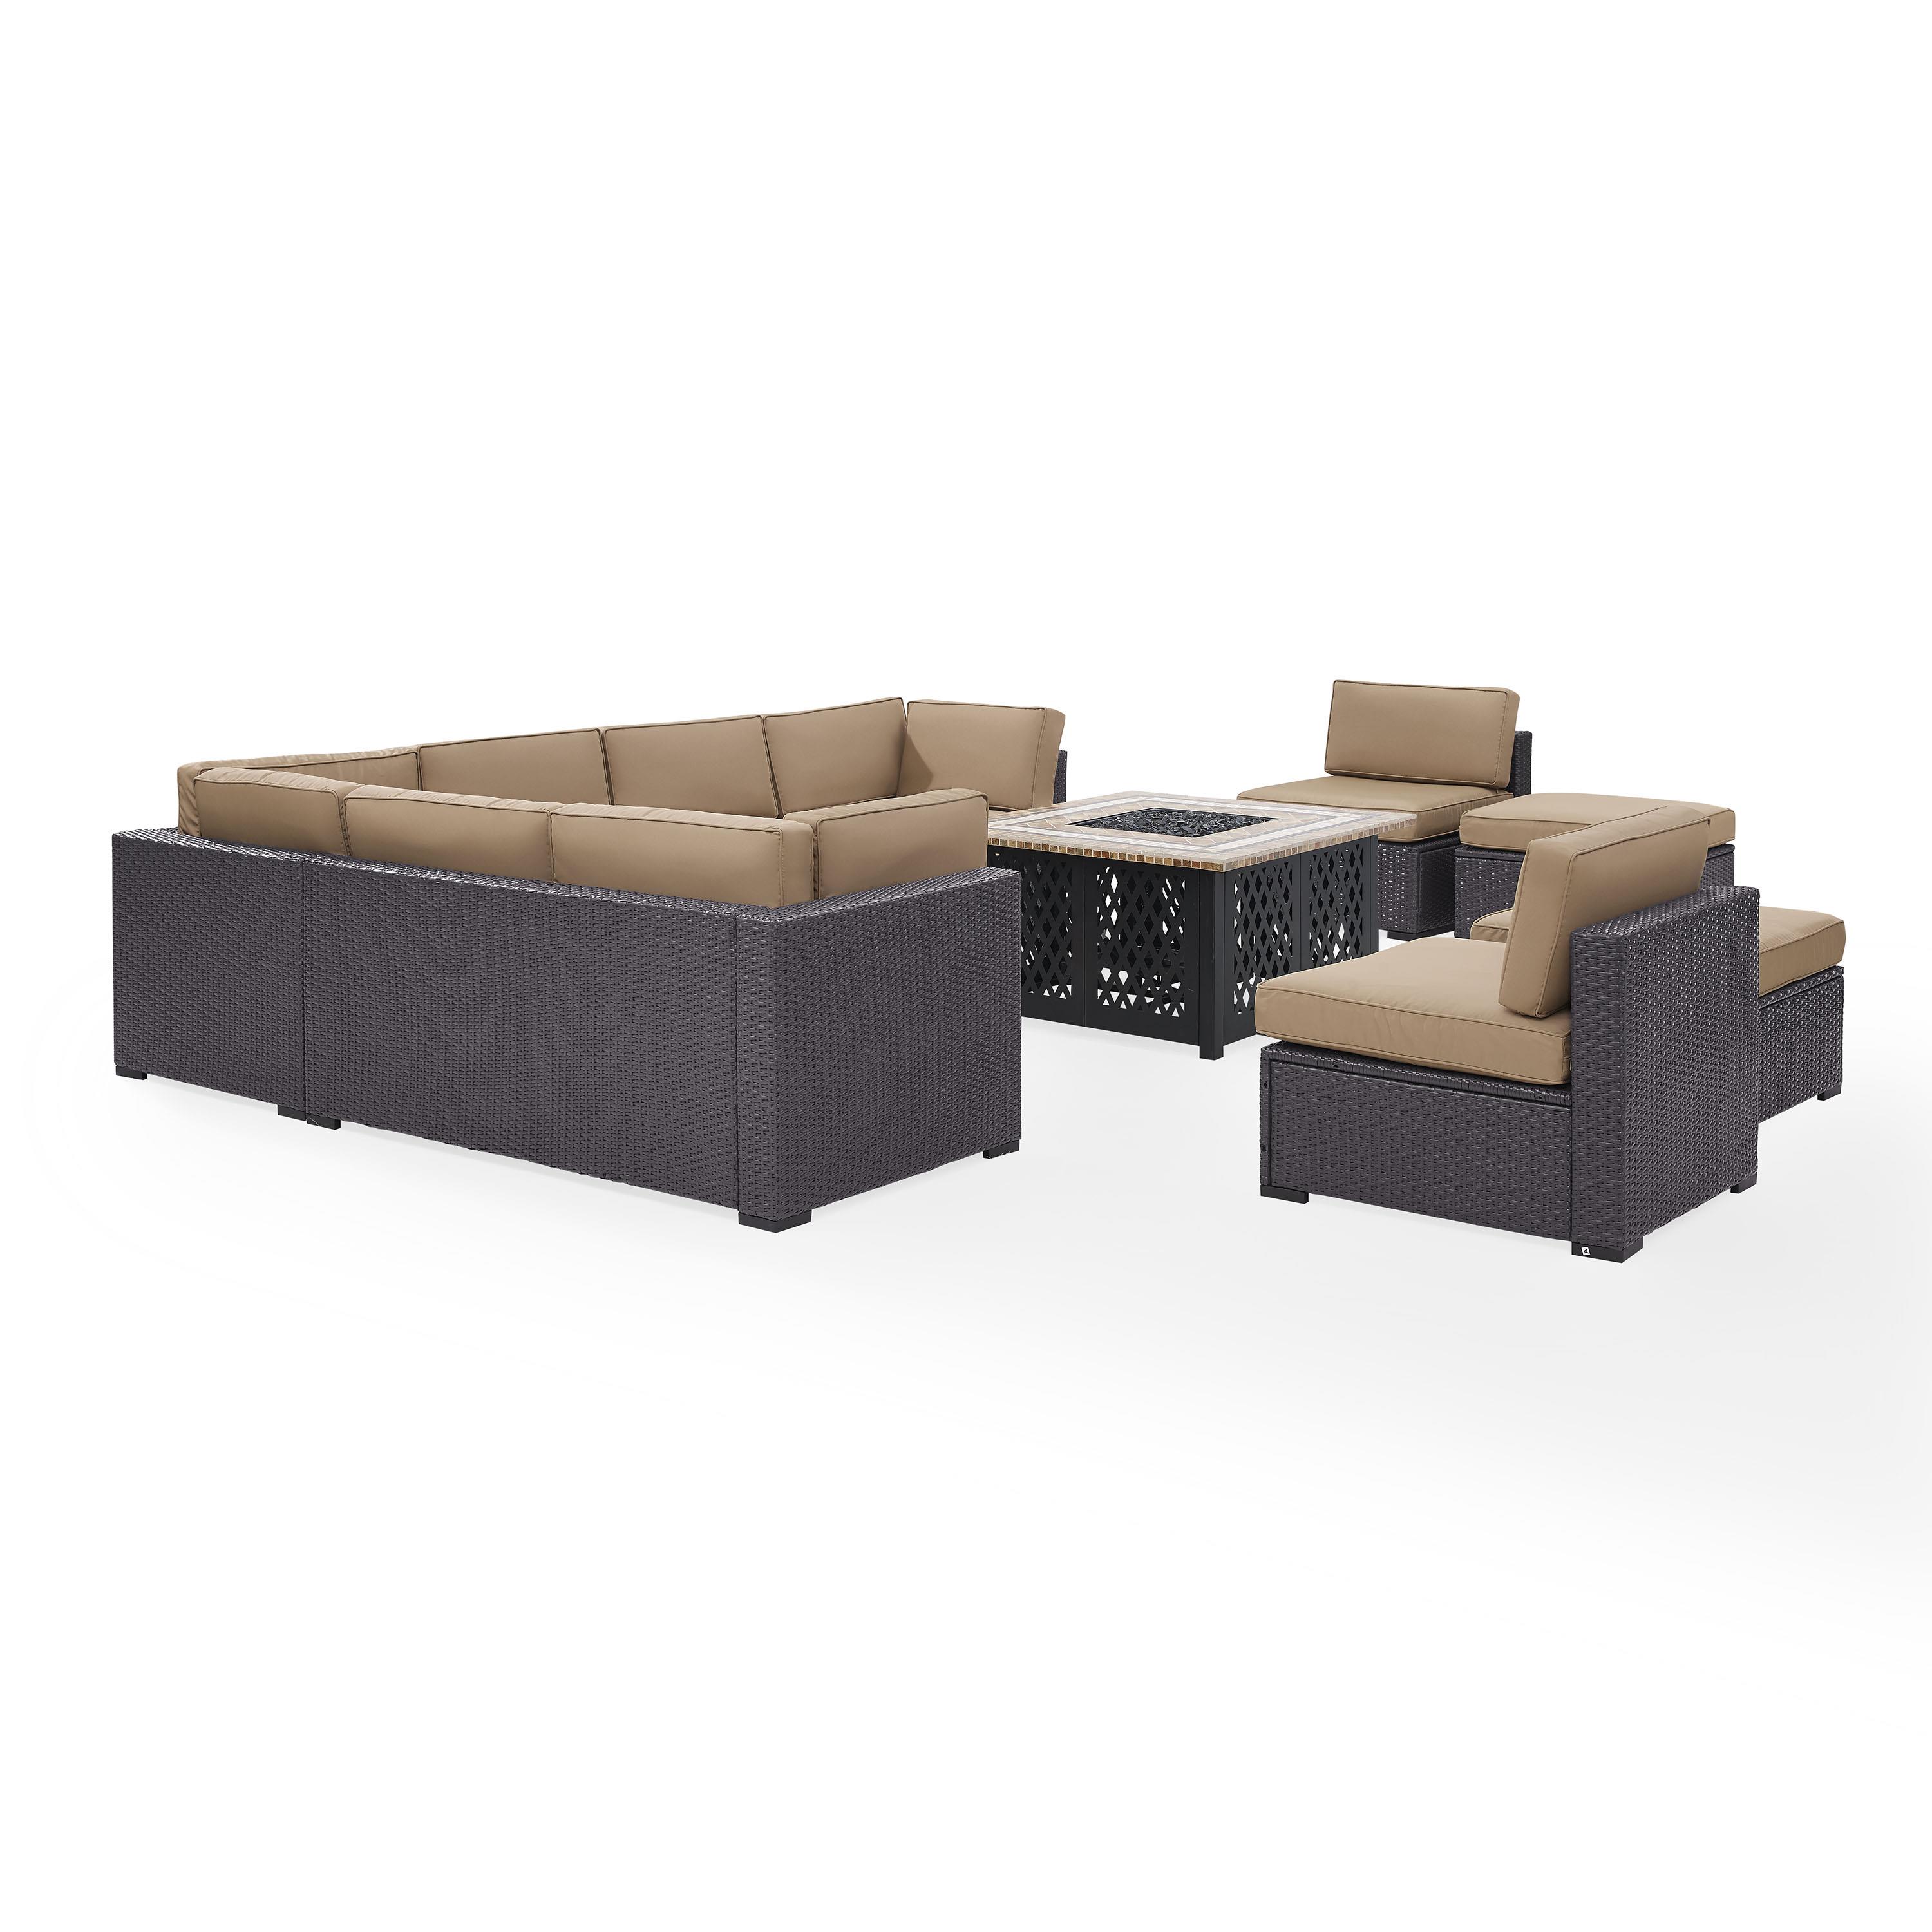 Crosley Furniture Biscayne 8 Piece Fabric Patio Fire Pit Sectional Set in Mocha - image 3 of 4